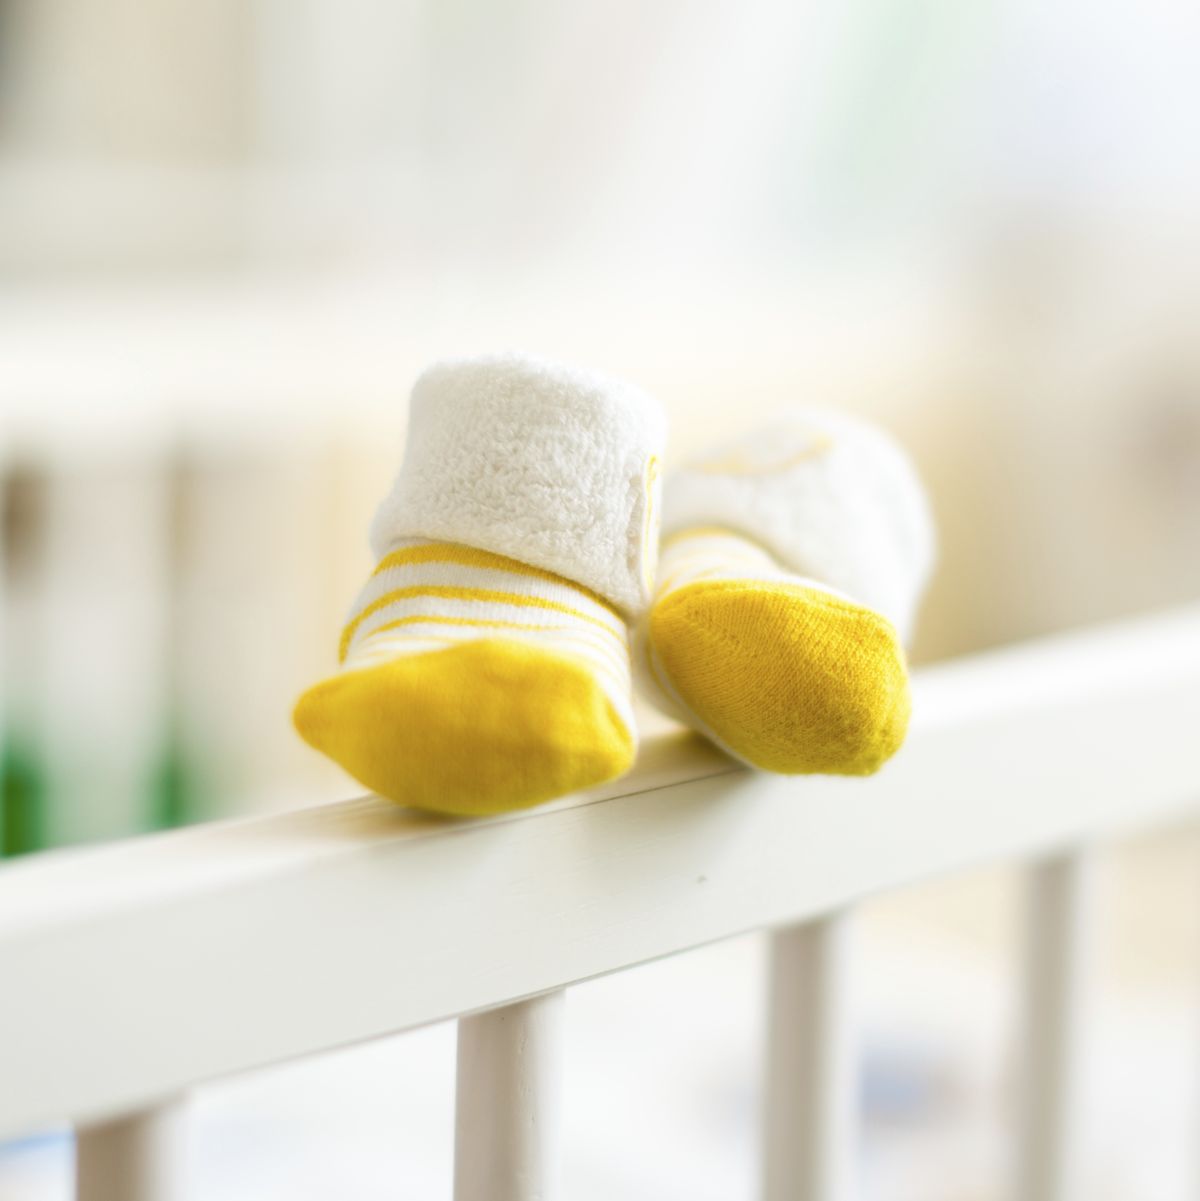 Baby booties on the edge of a cot